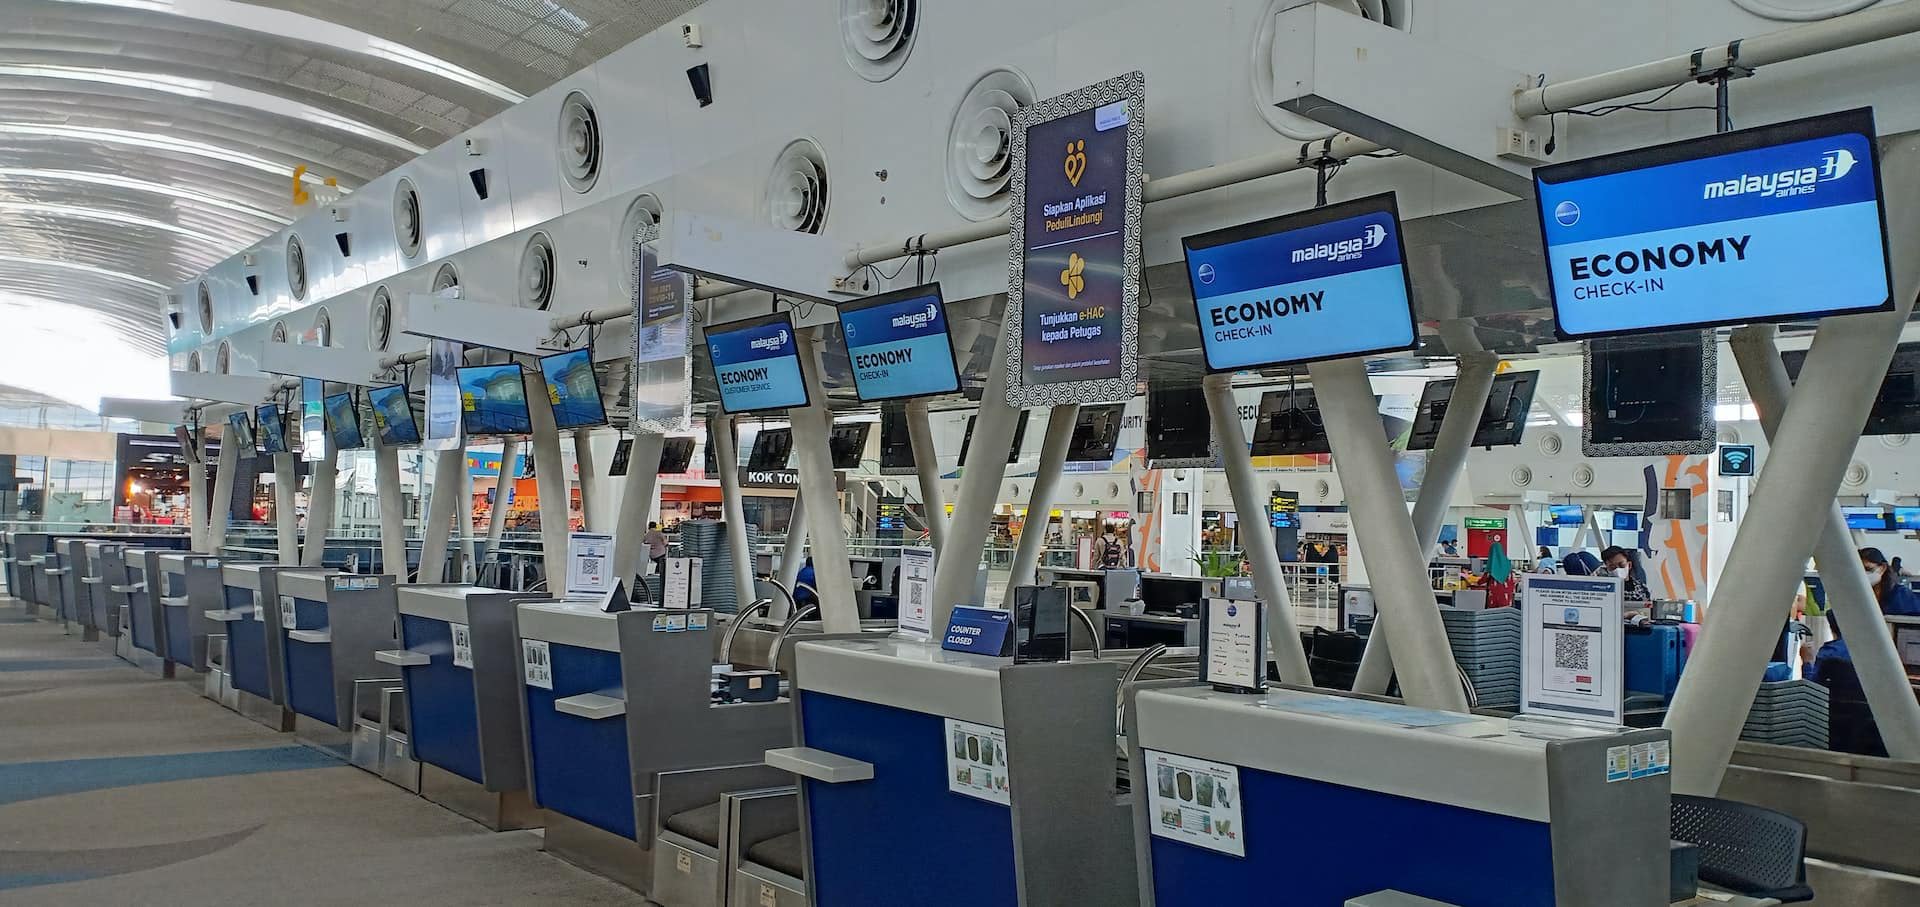 airport check-in counters